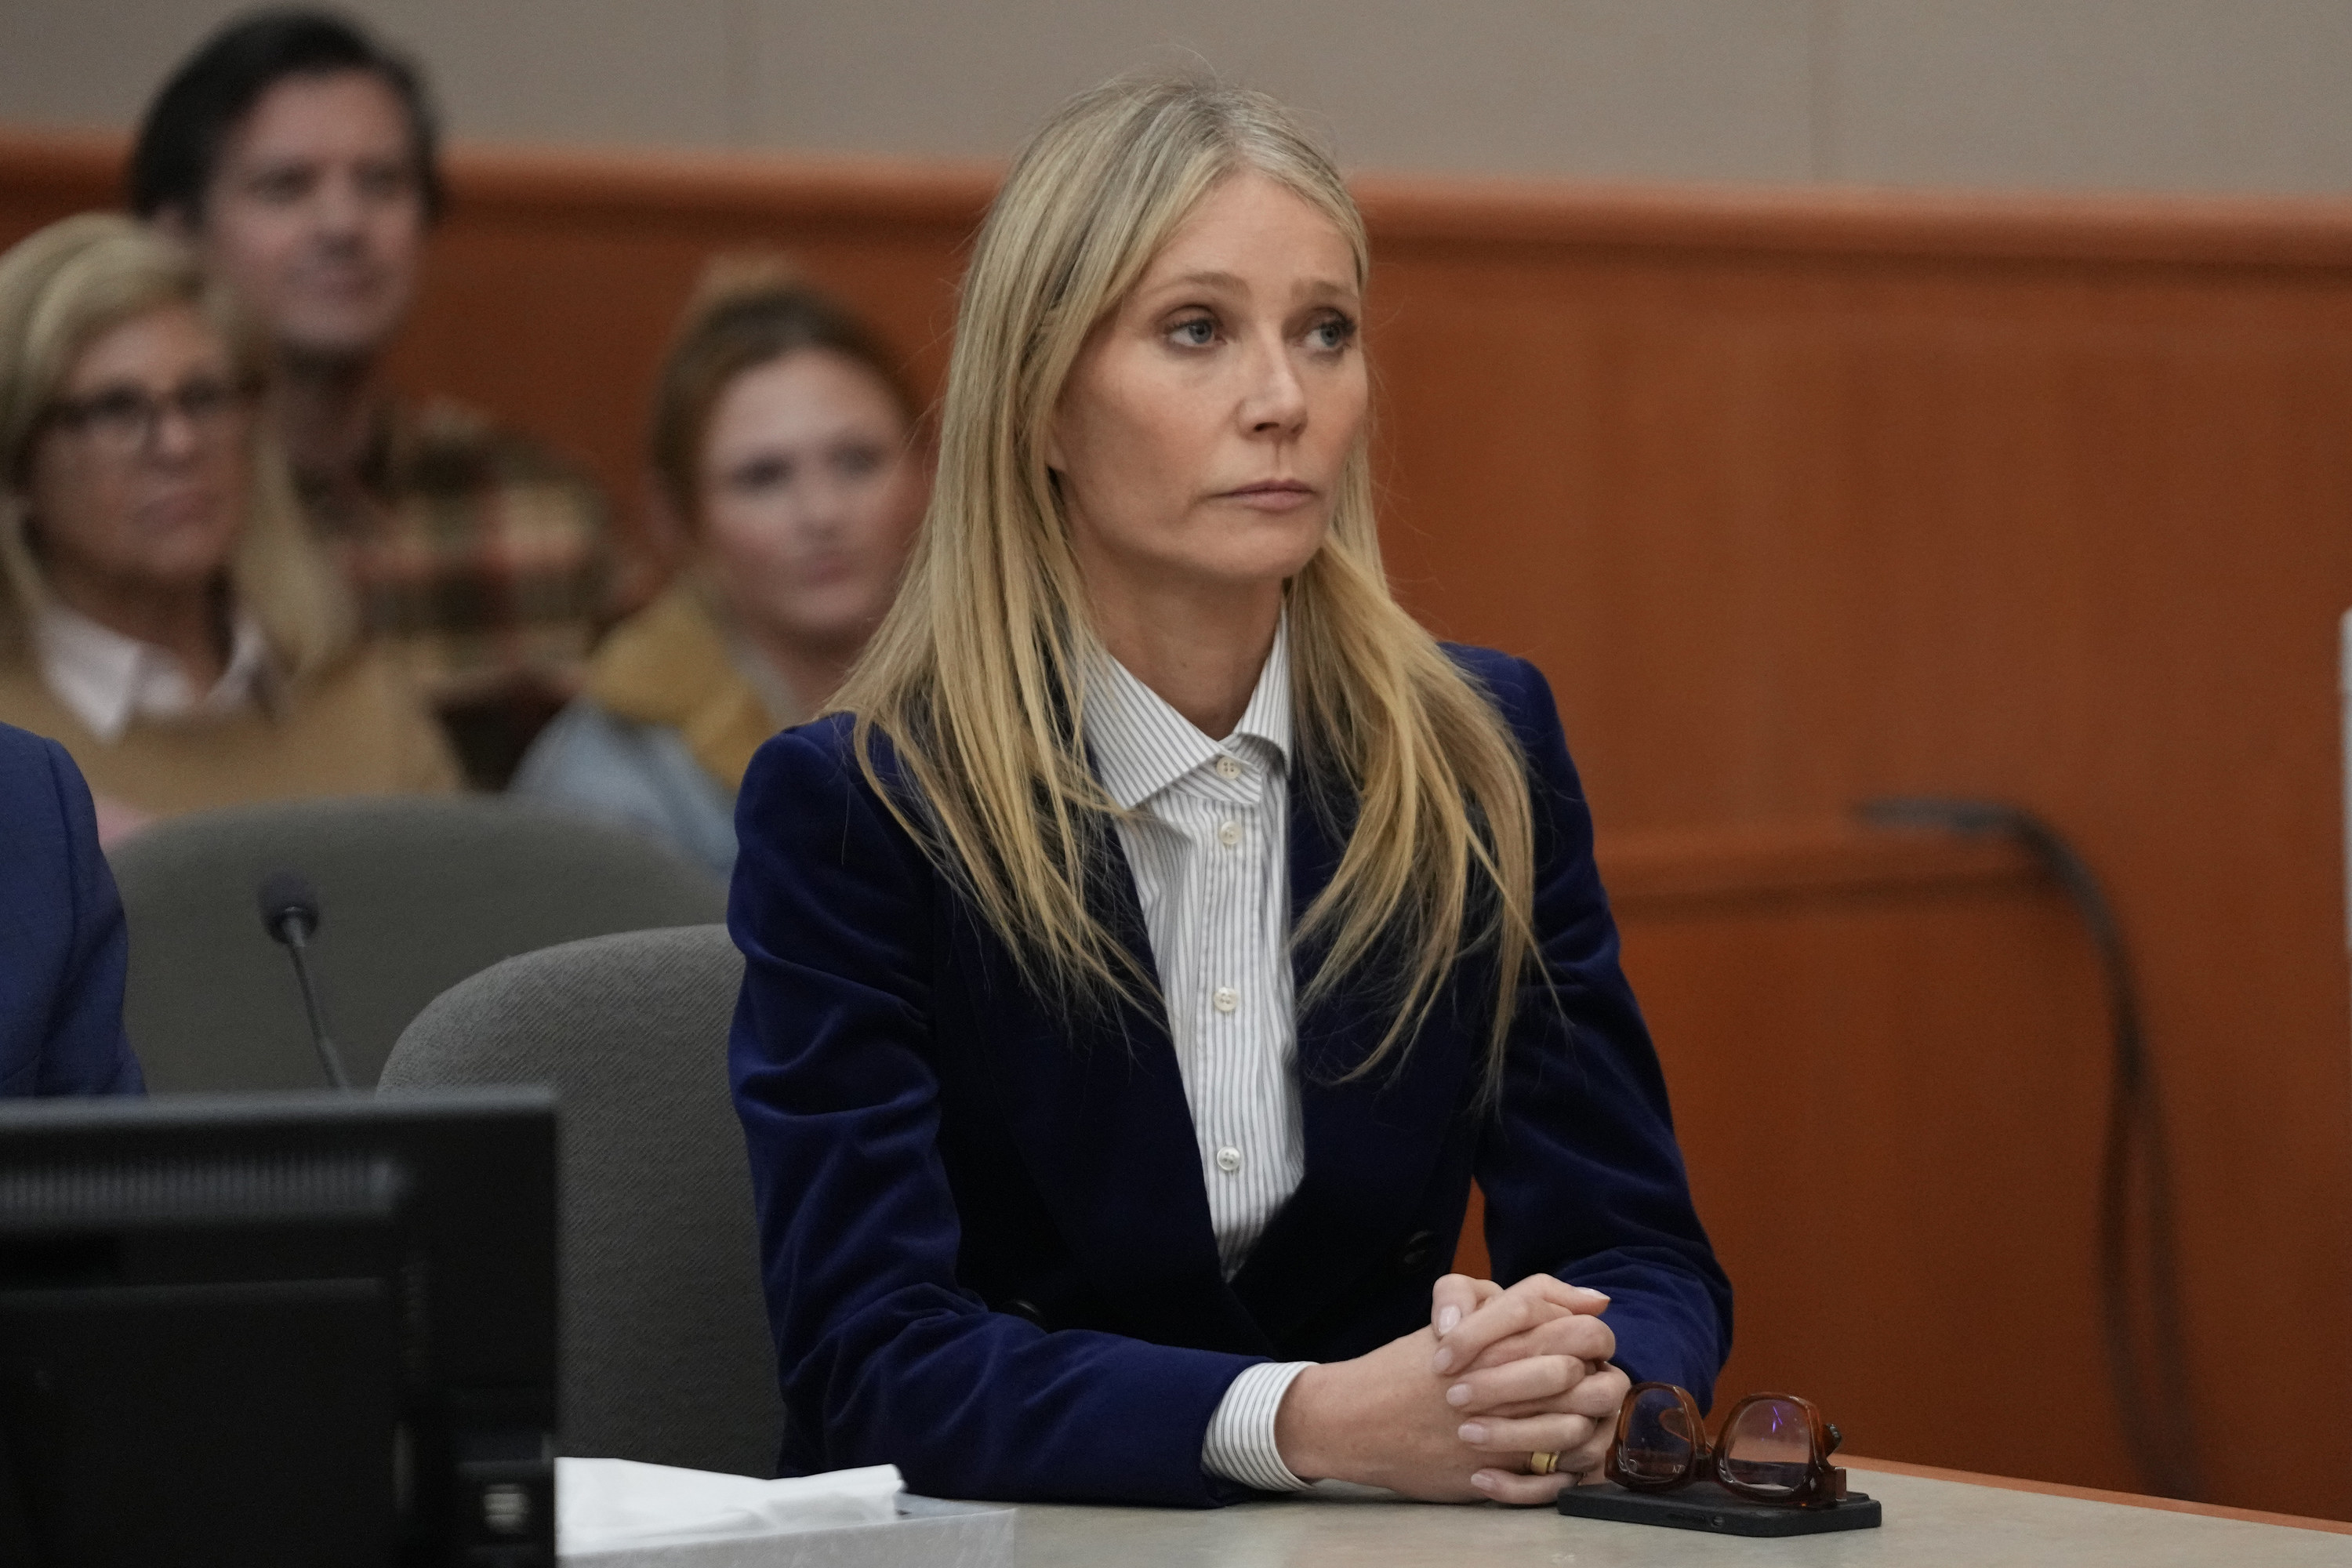 Gwyneth Paltrow, wearing a suit, sitting at the front of a courtroom looking somber